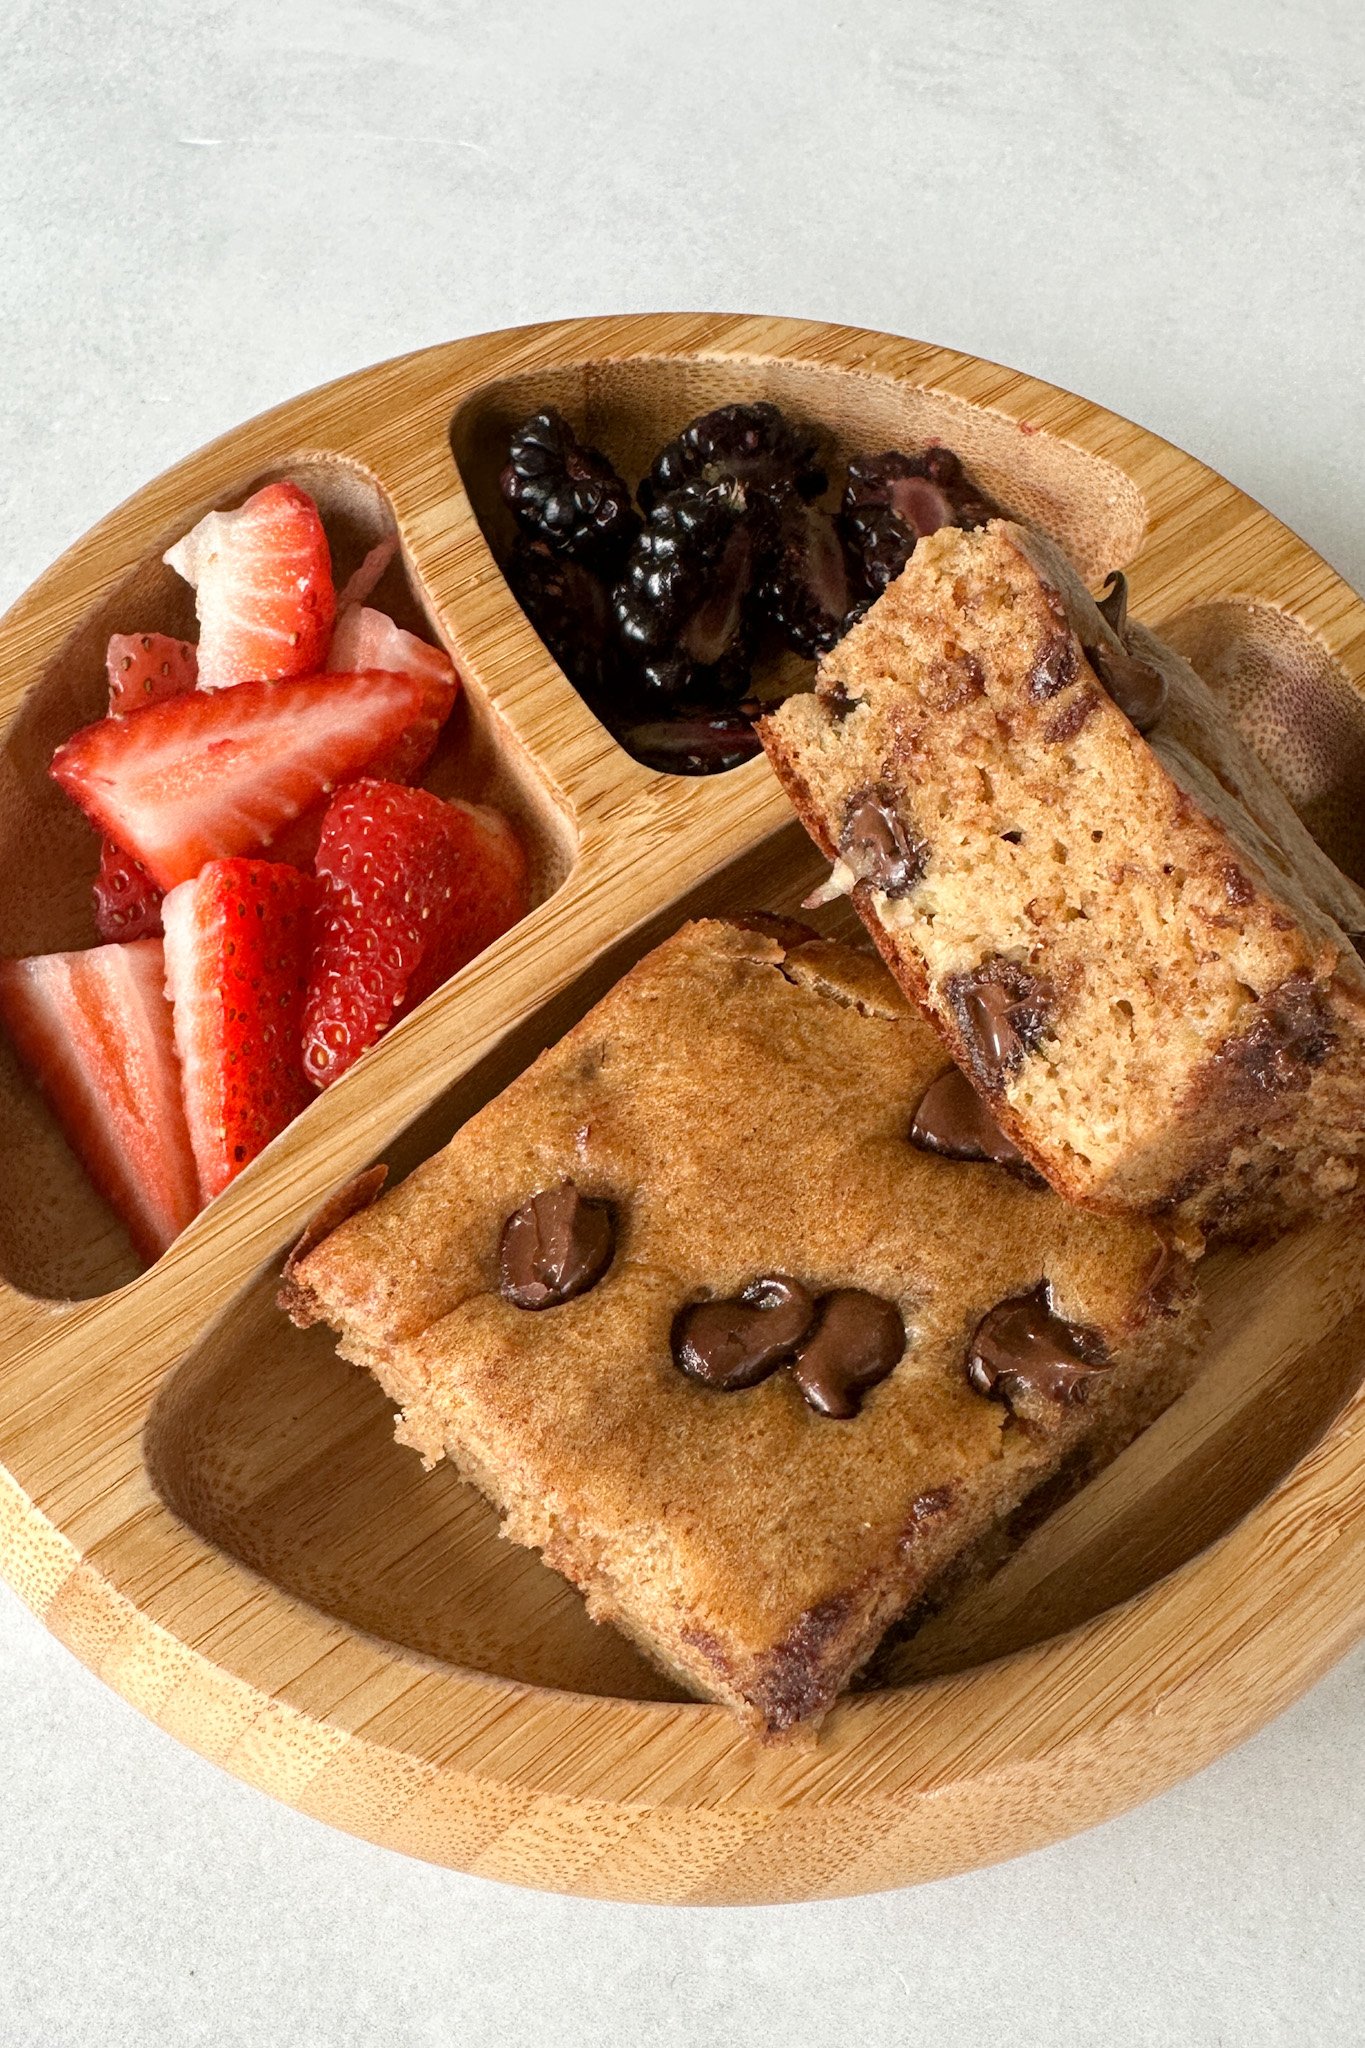 Flourless banana cake served with berries.